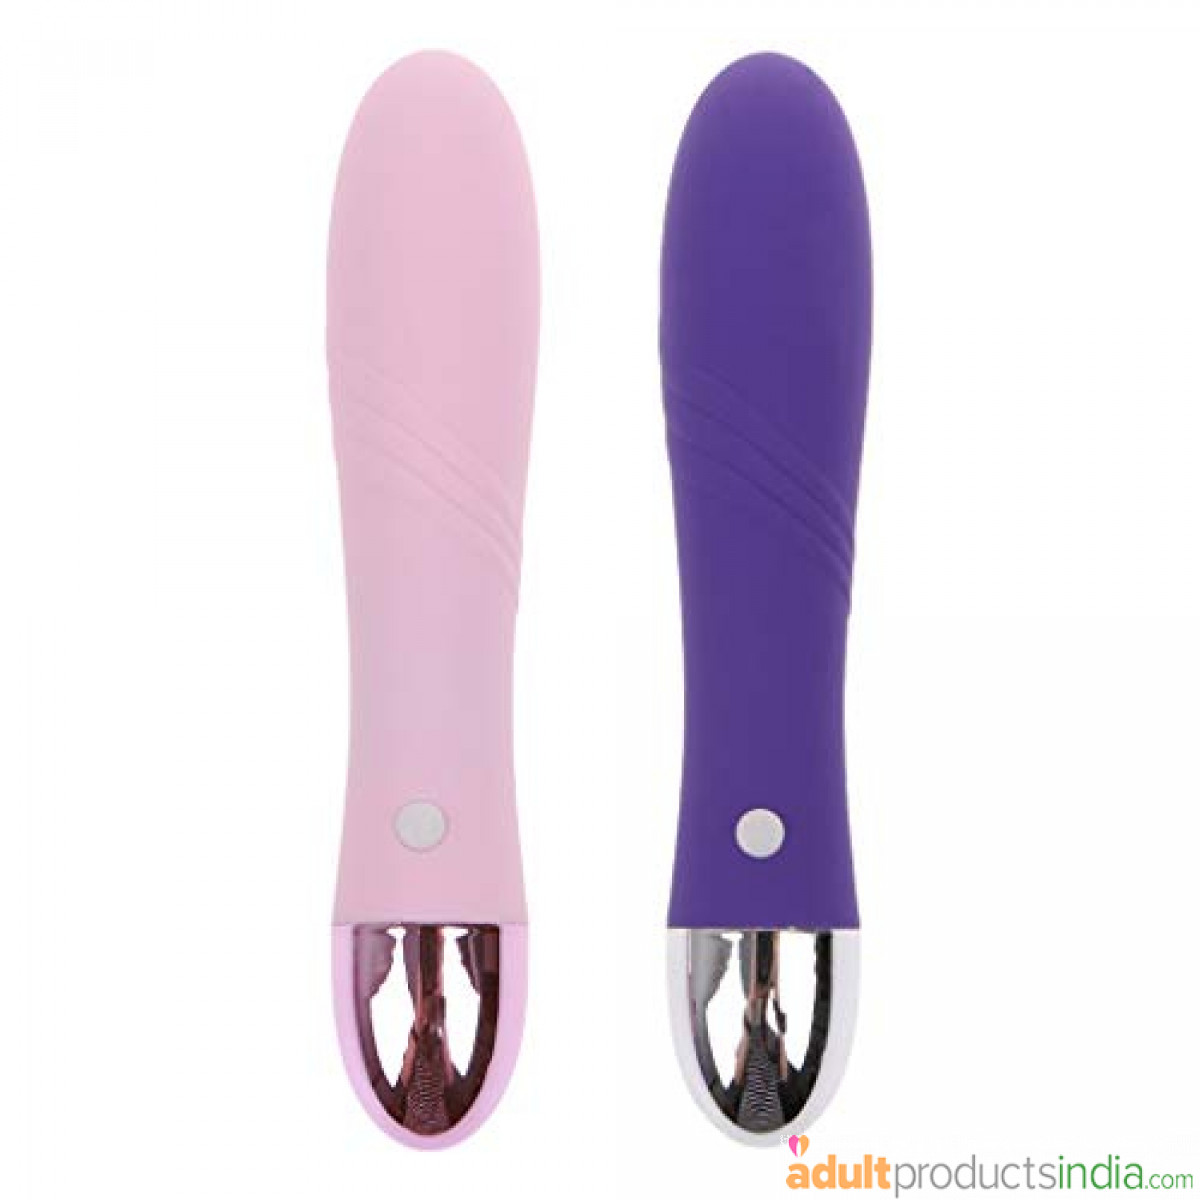 12 Frequency Clitoris Dildo USB Rechargeable Purple Pink Vibrator